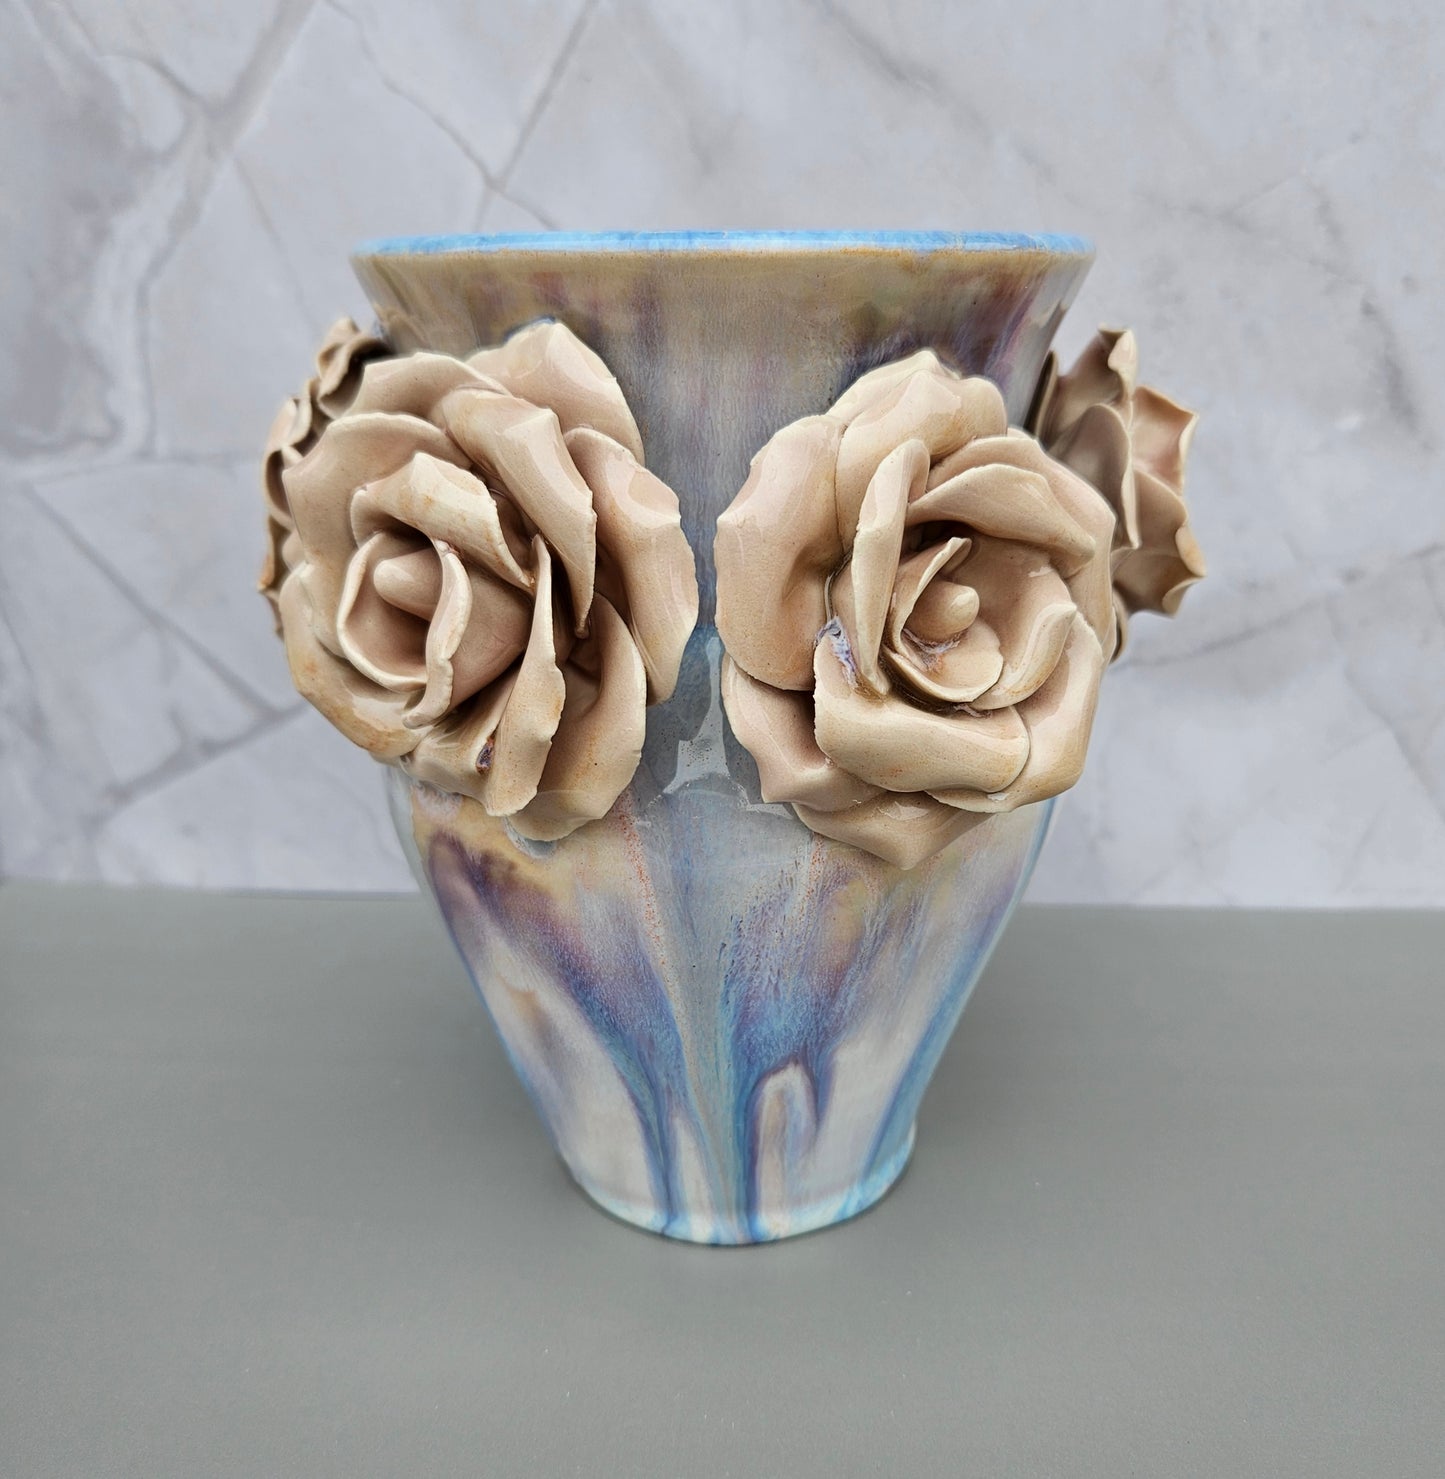 Pink, blue and white drippy rose vase, 9 inches high